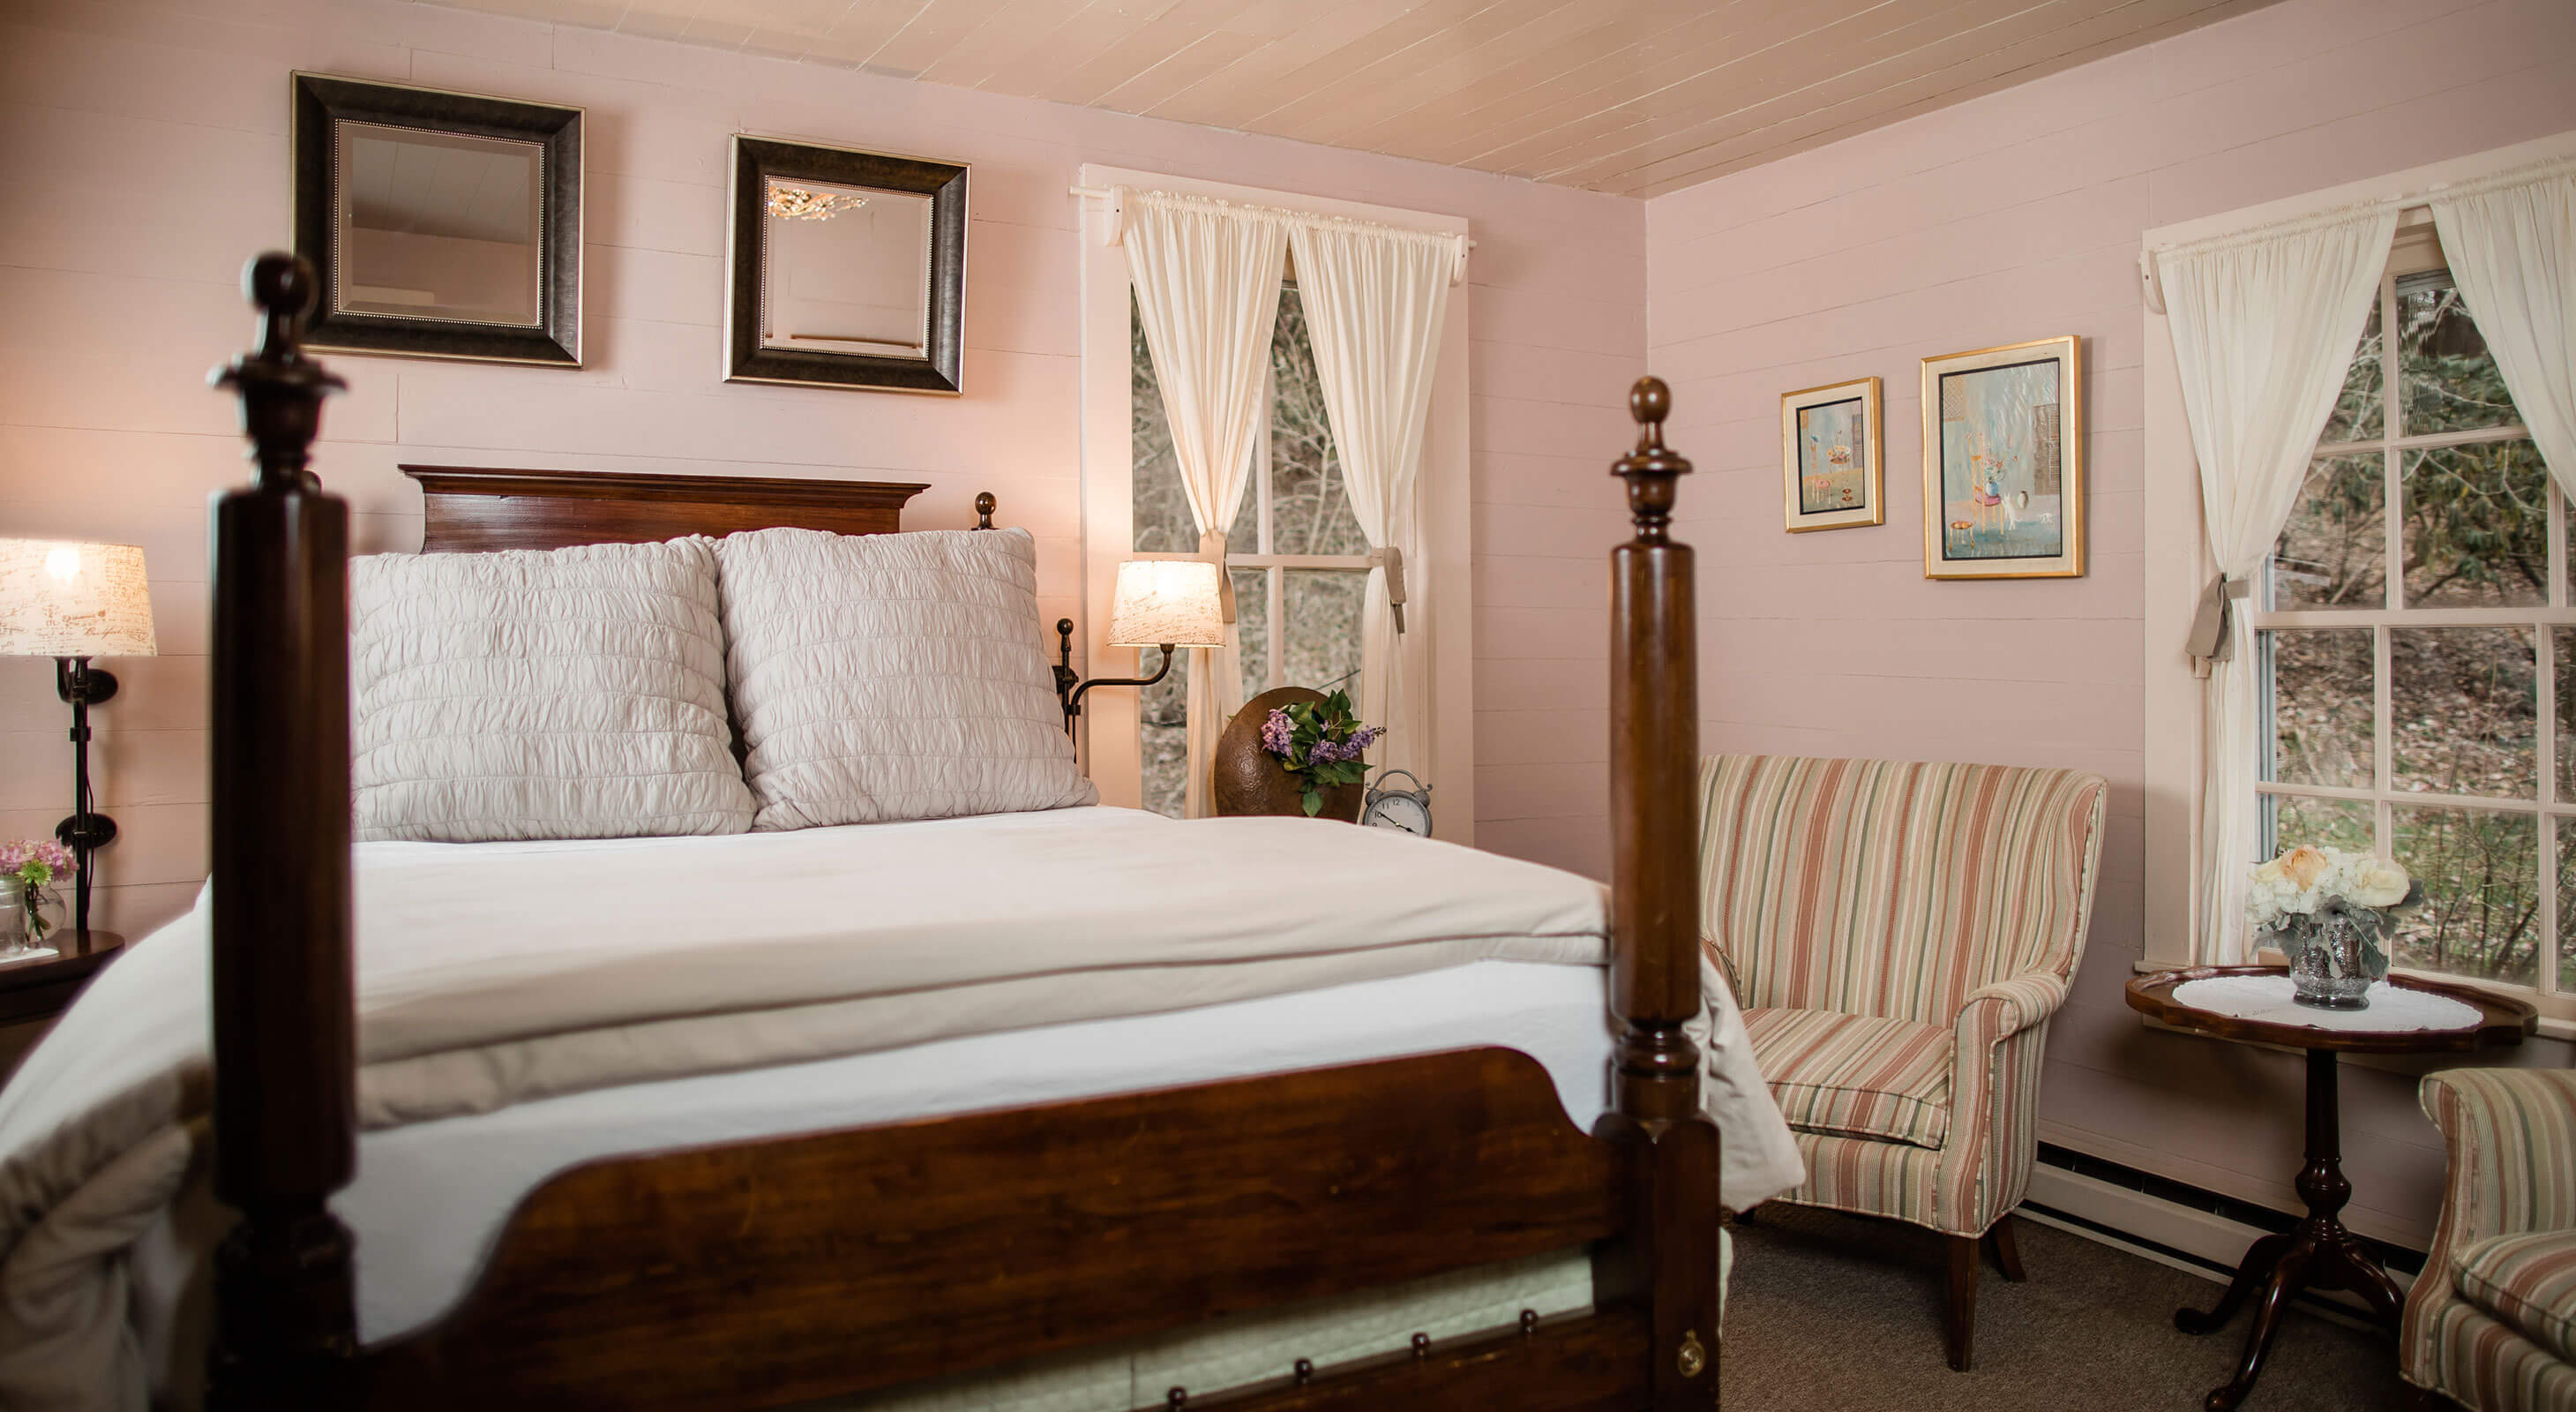 Luxurious four-poster bed in North Carolina bed and breakfast